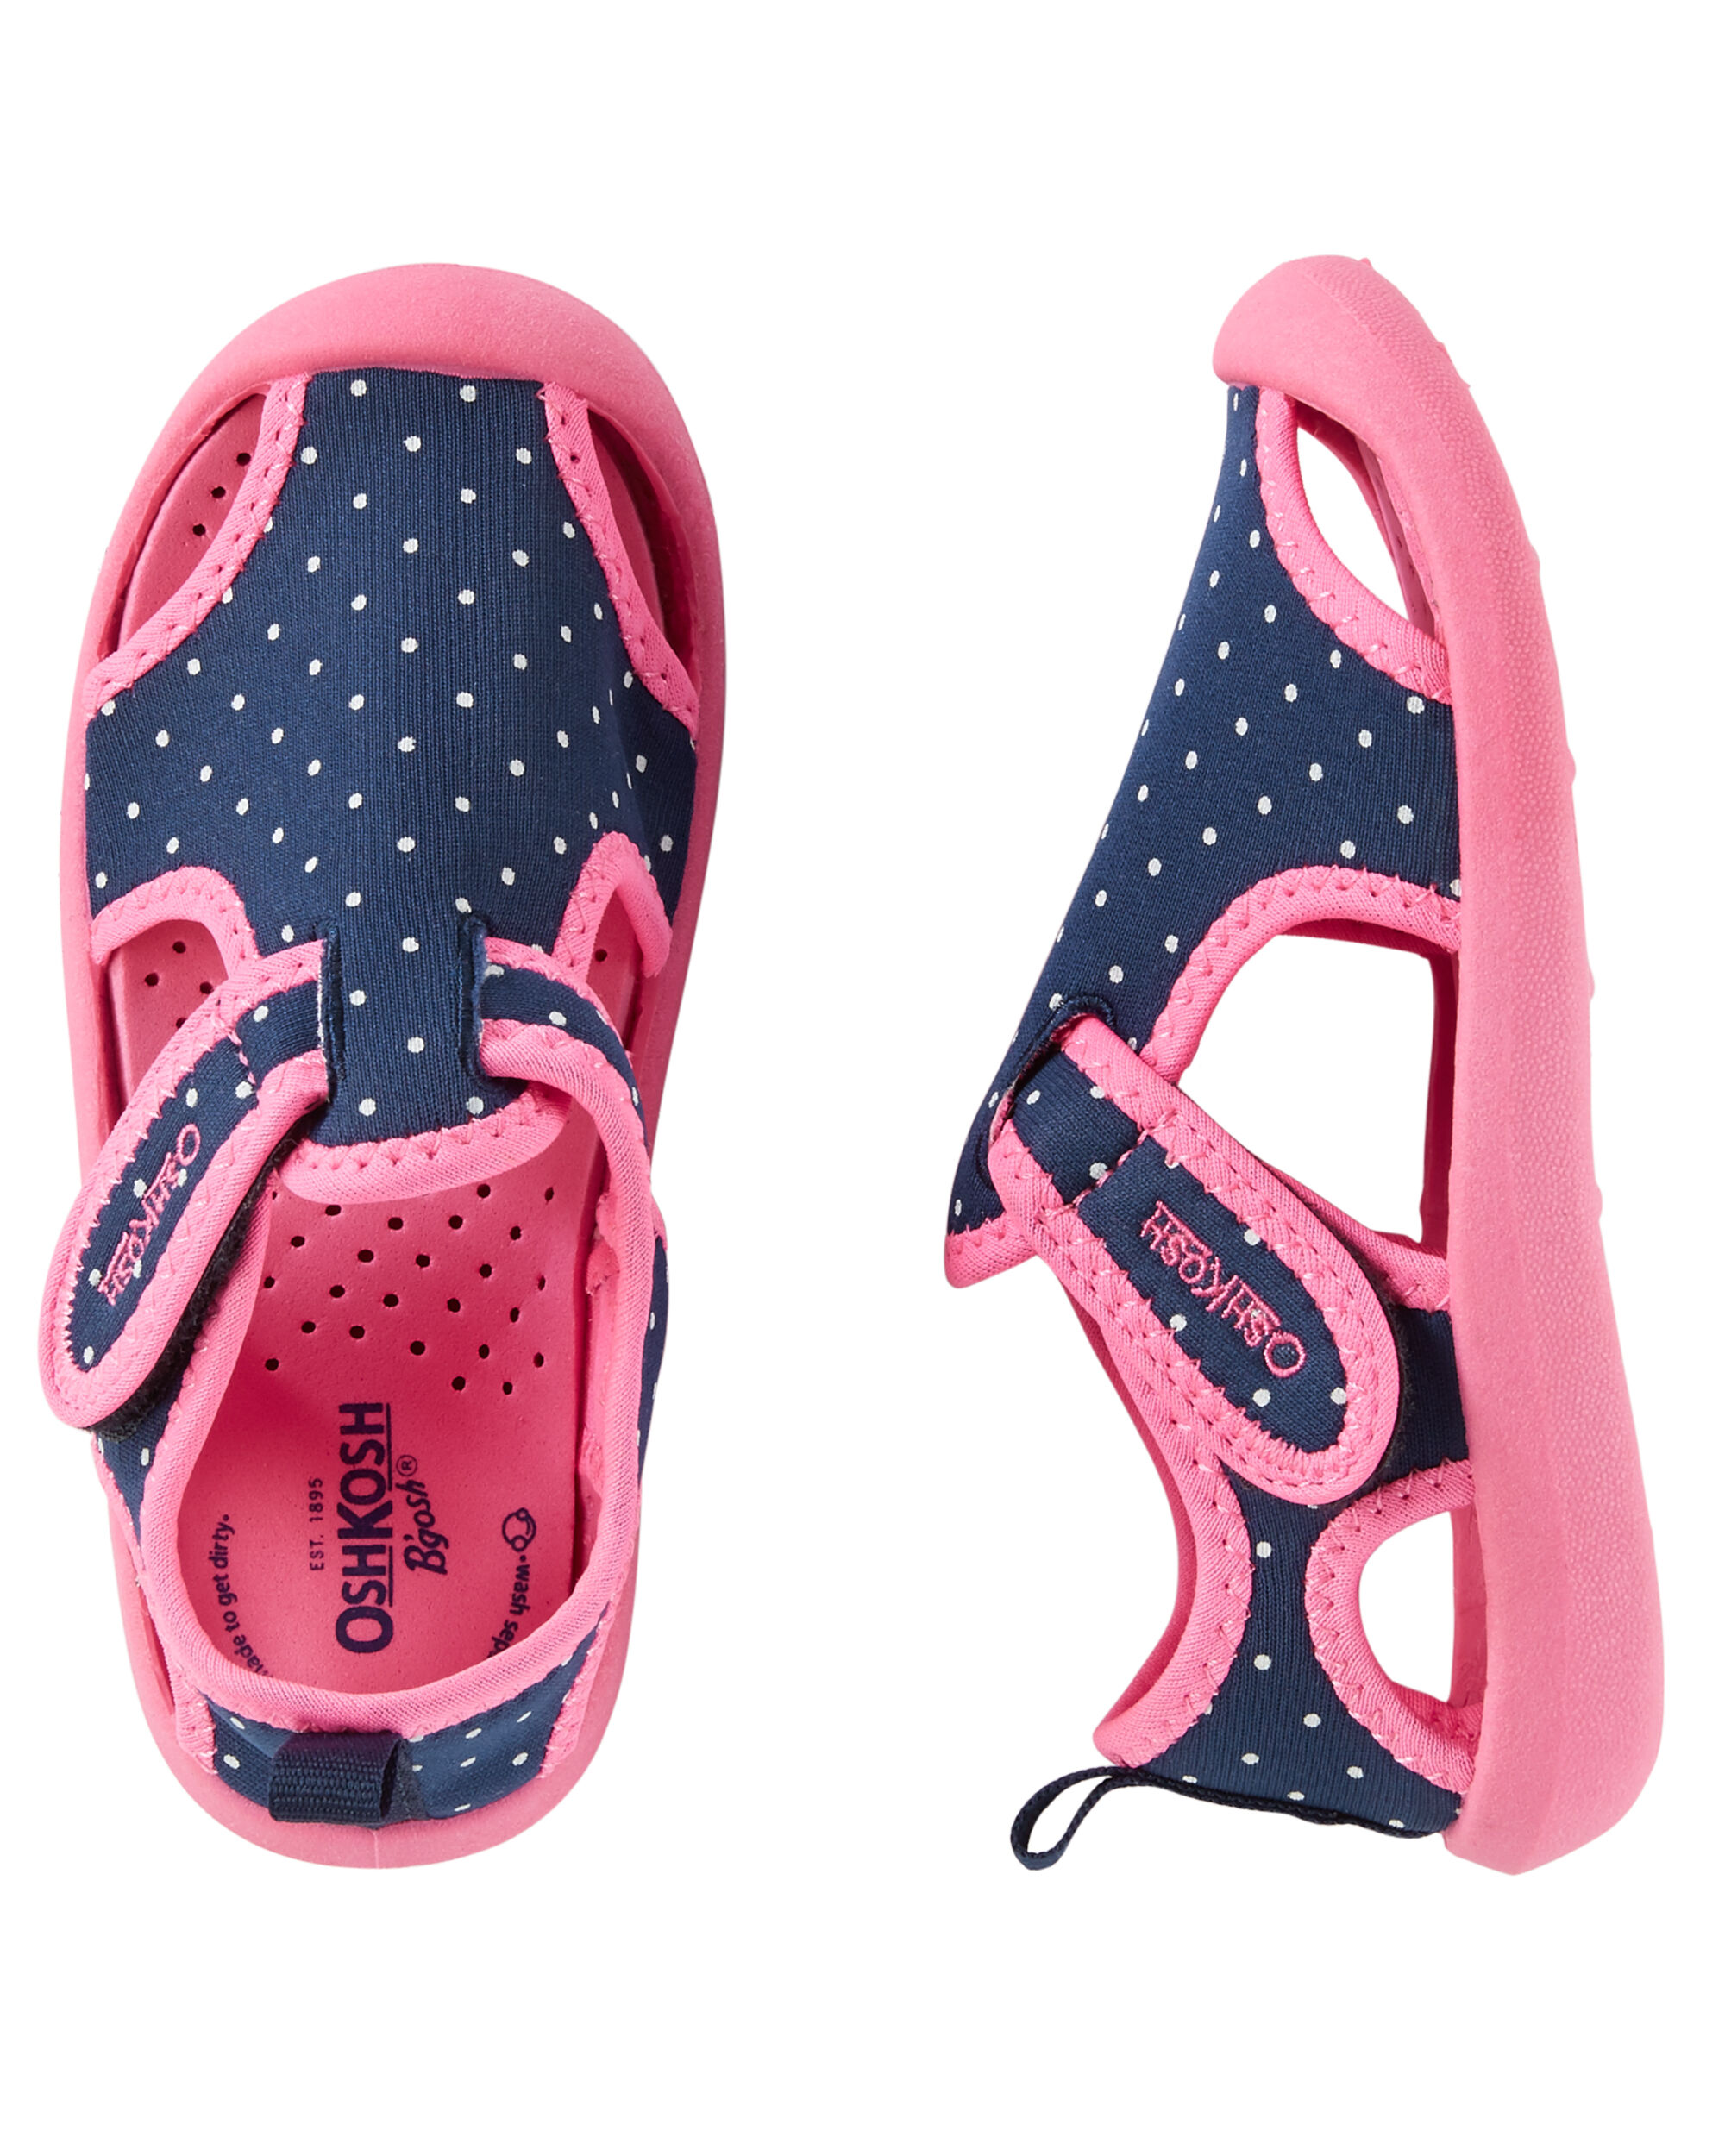 baby water shoes canada